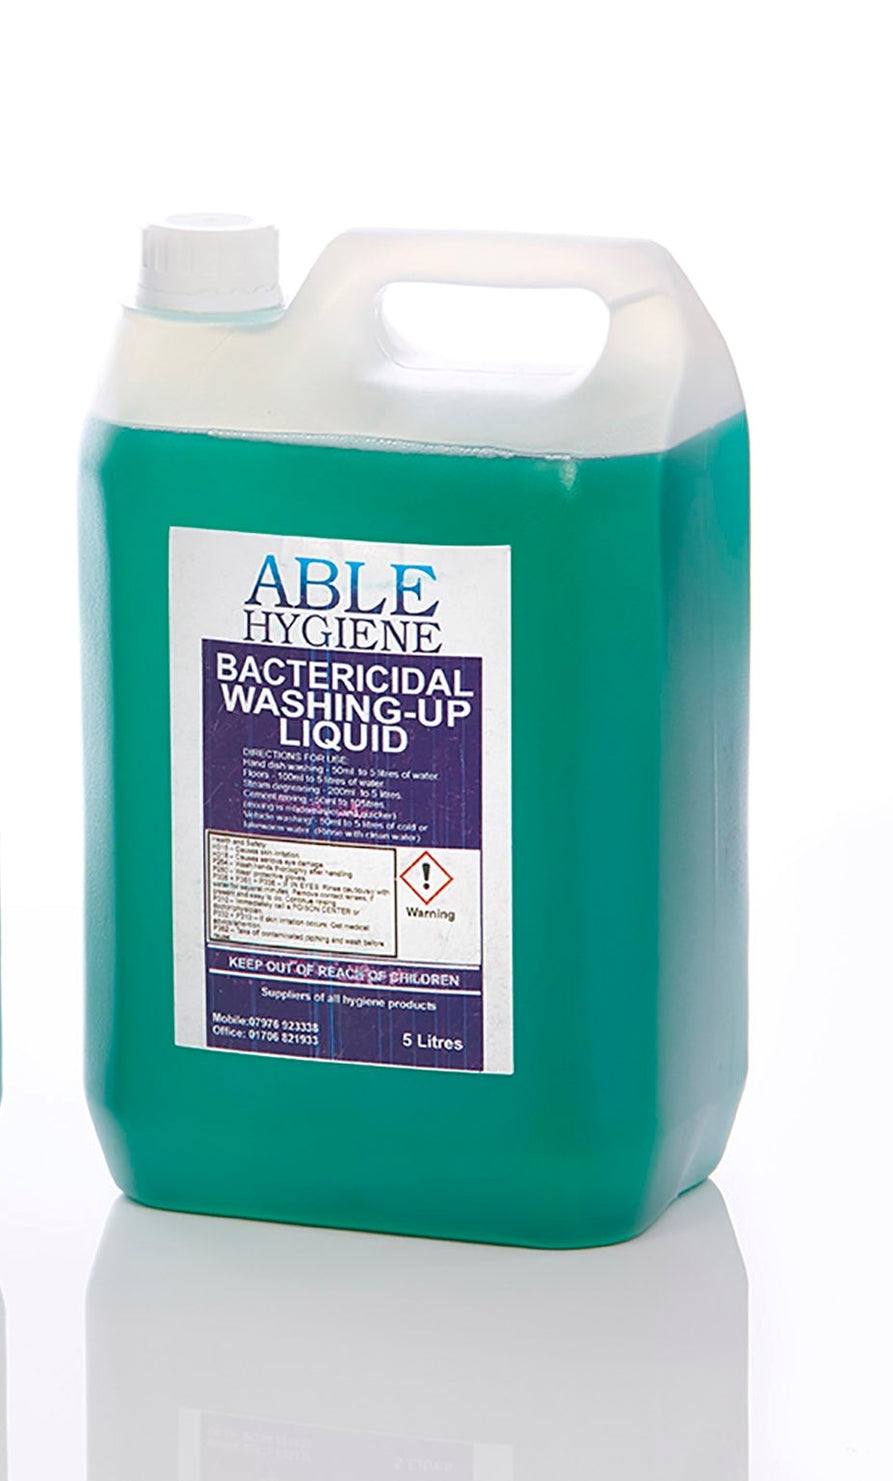 Bacterial Washing Up Liquid 5 Litre